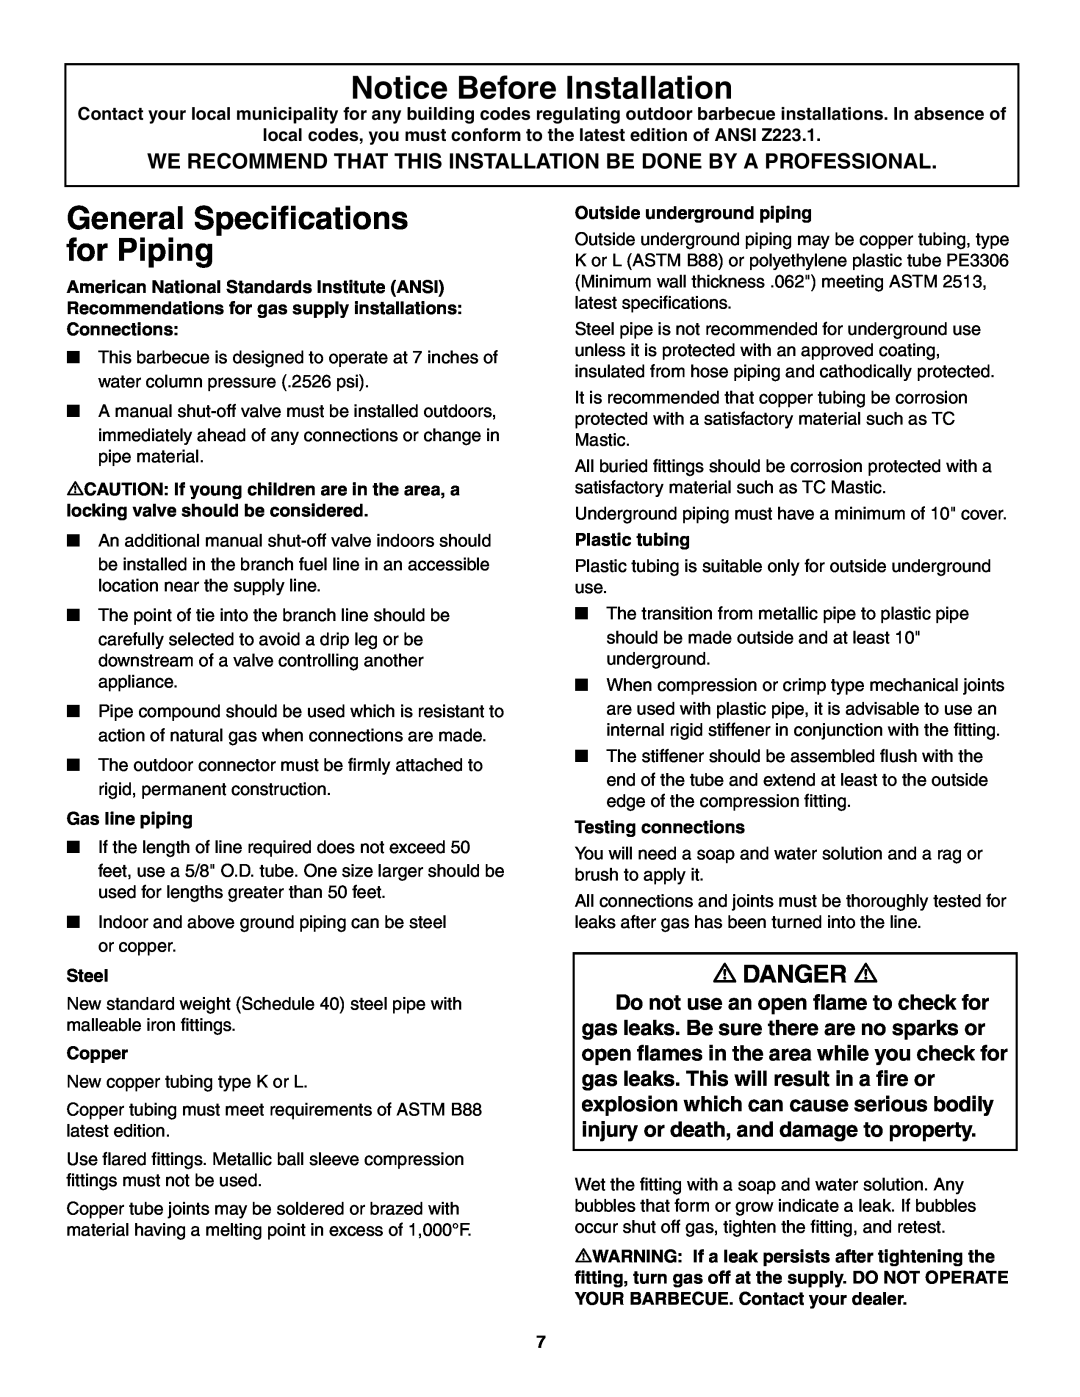 Weber 5500 owner manual Notice Before Installation, General Specifications for Piping, Danger 